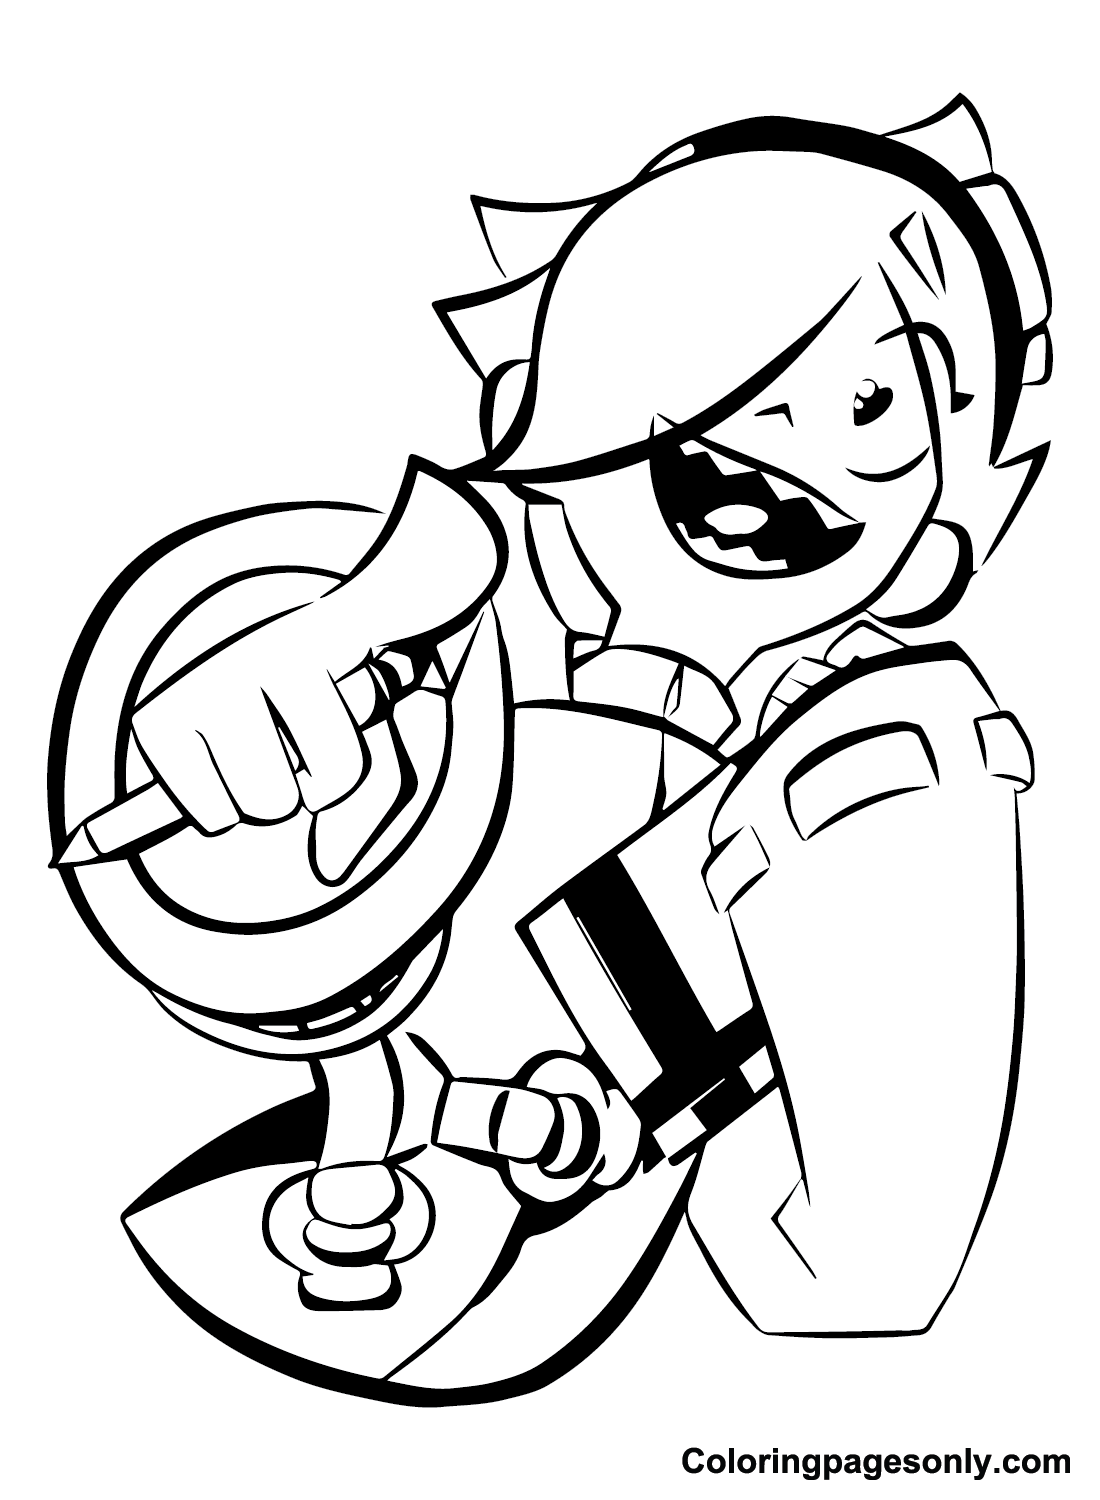 Free Colette Brawl Stars Coloring Pages